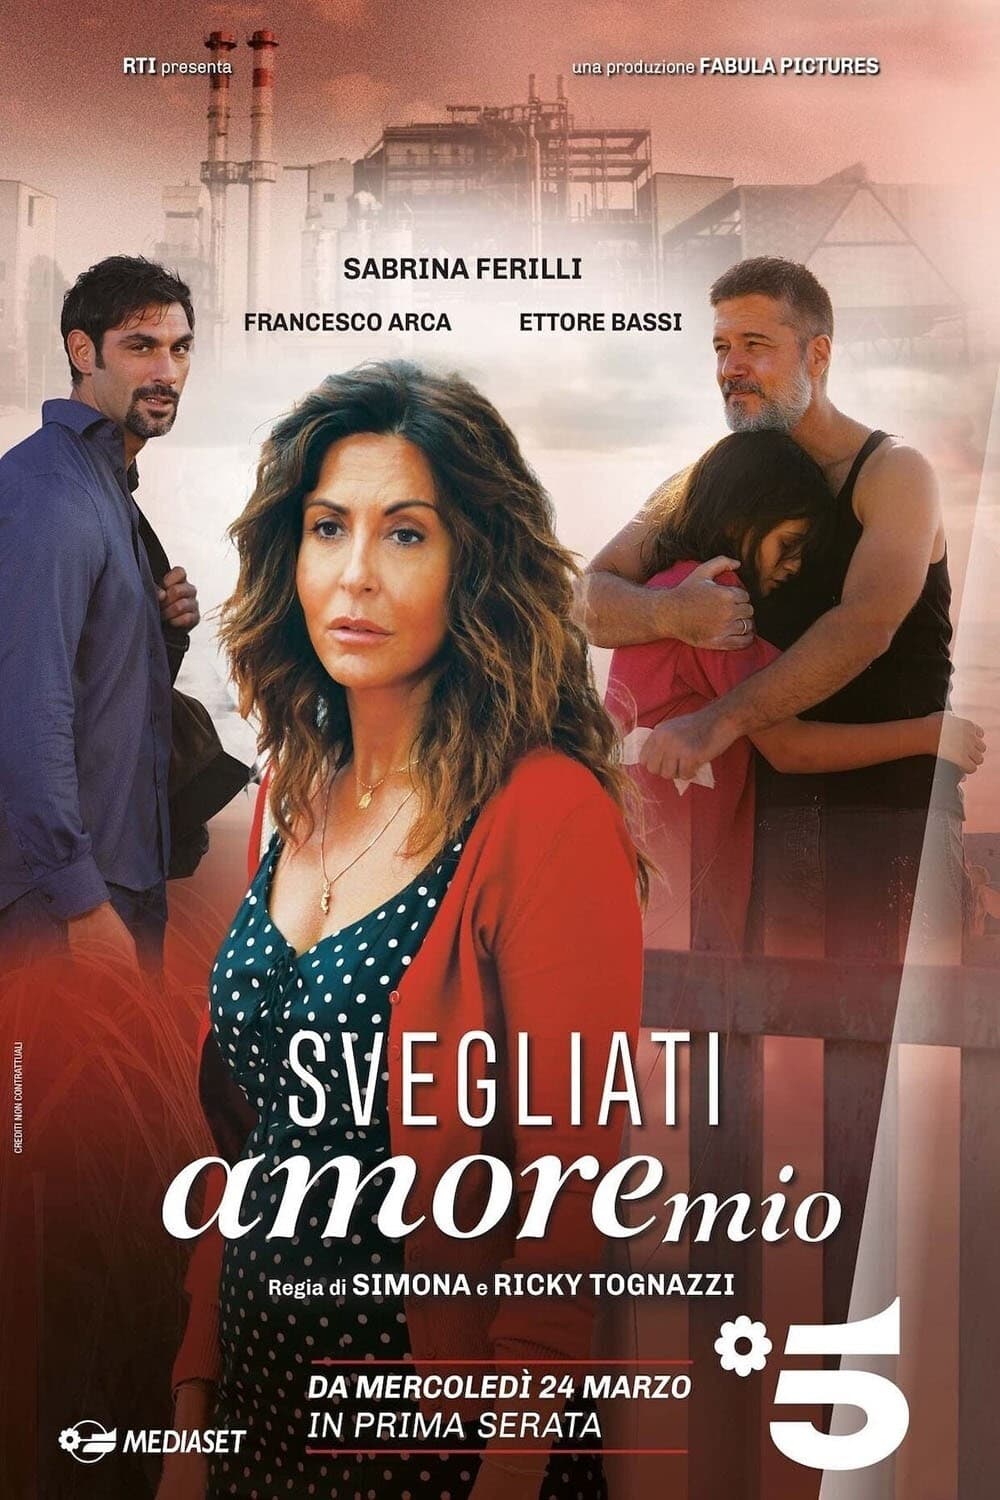 TV ratings for Wake Up My Love (Svegliati Amore Mio) in Argentina. Canale 5 TV series